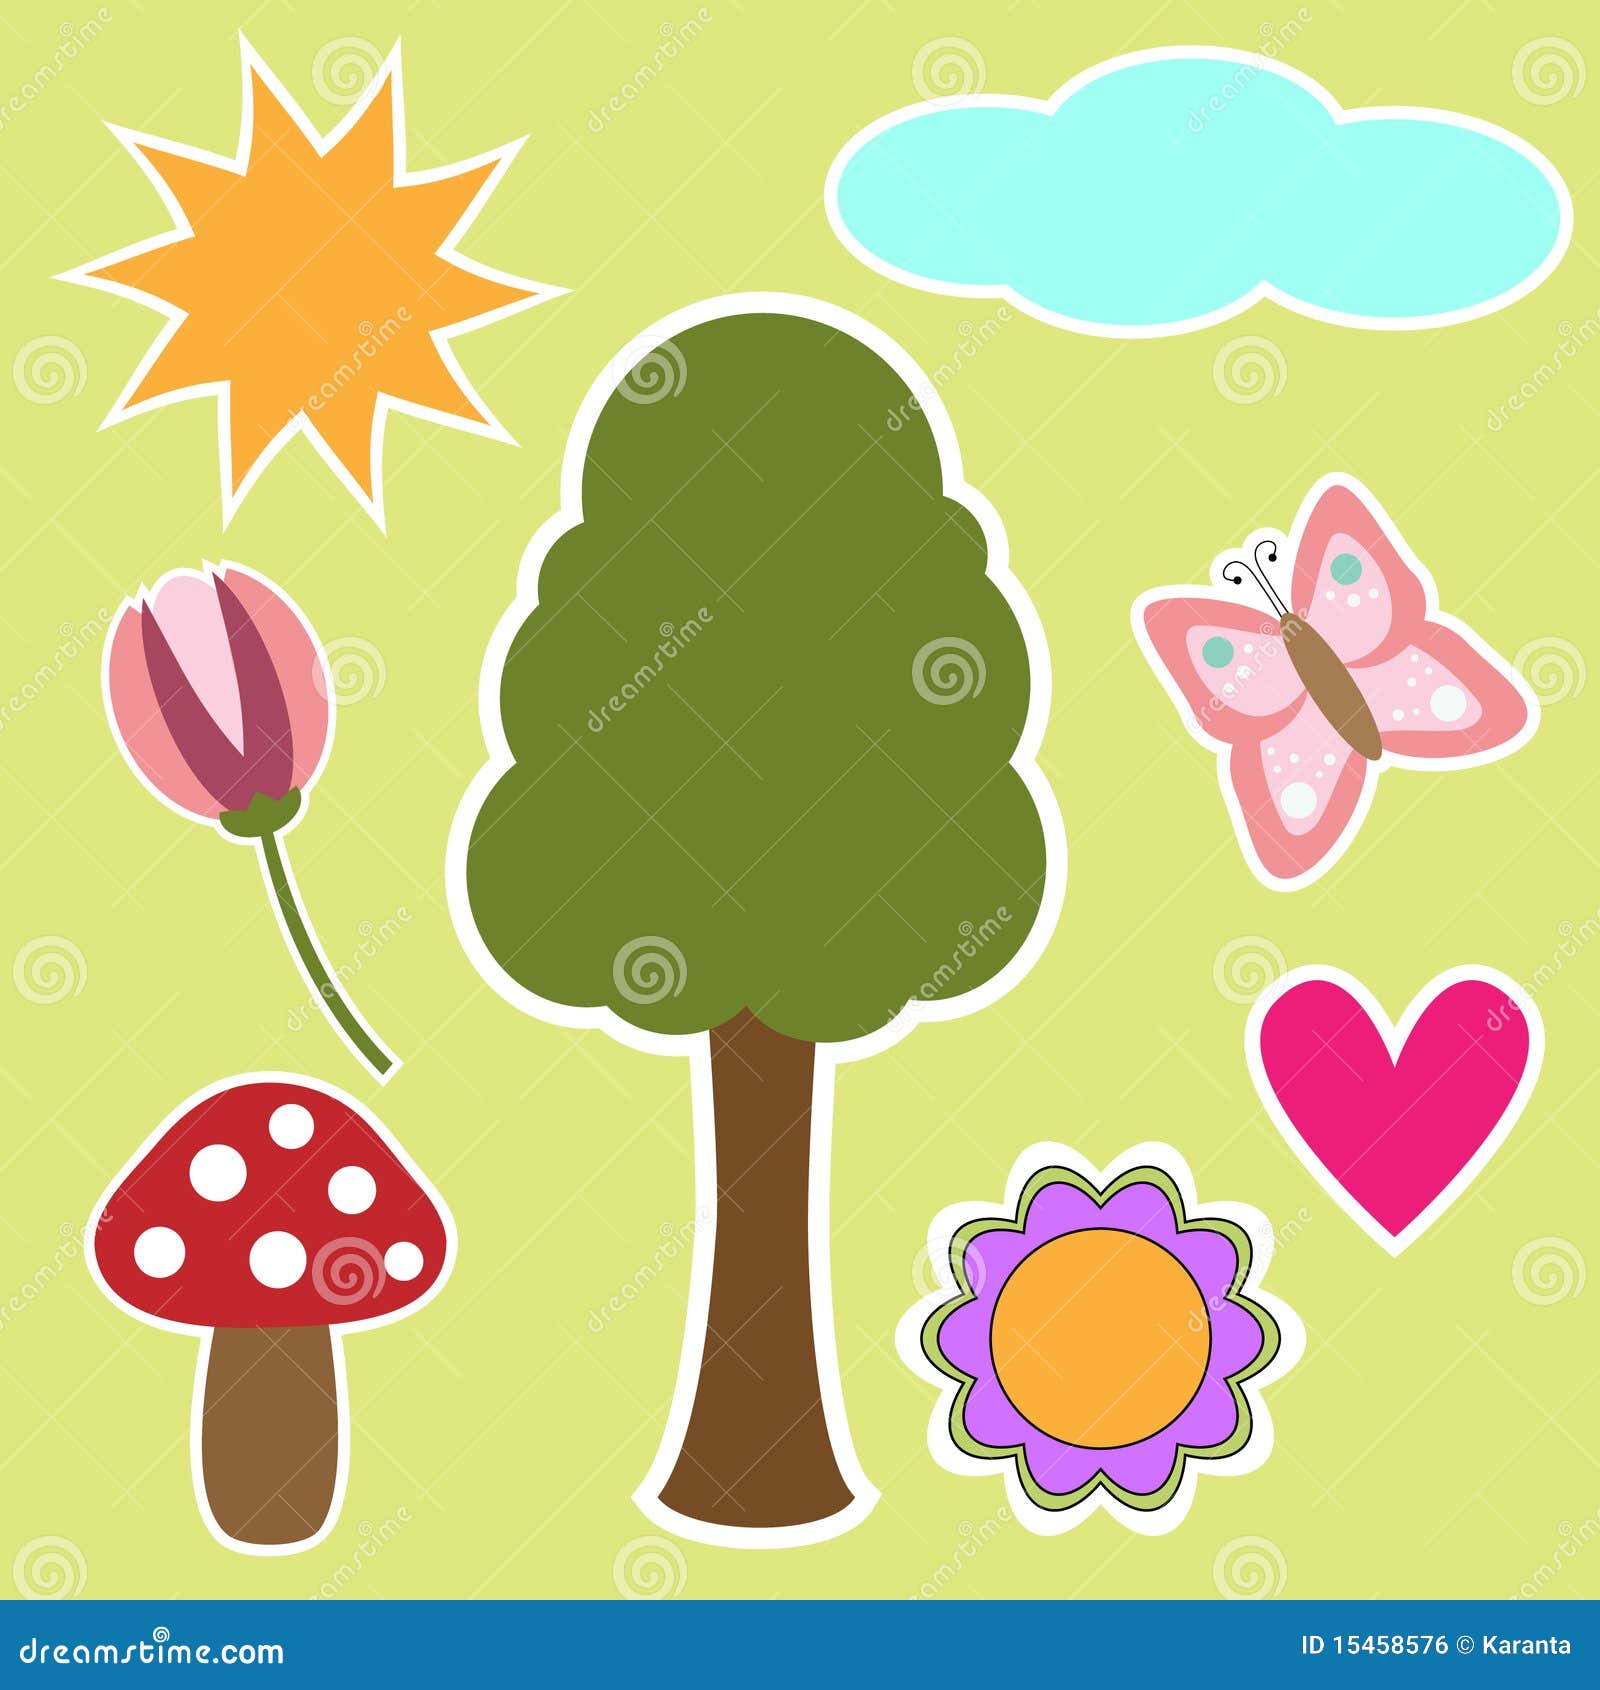 clipart collection royalty free - photo #40